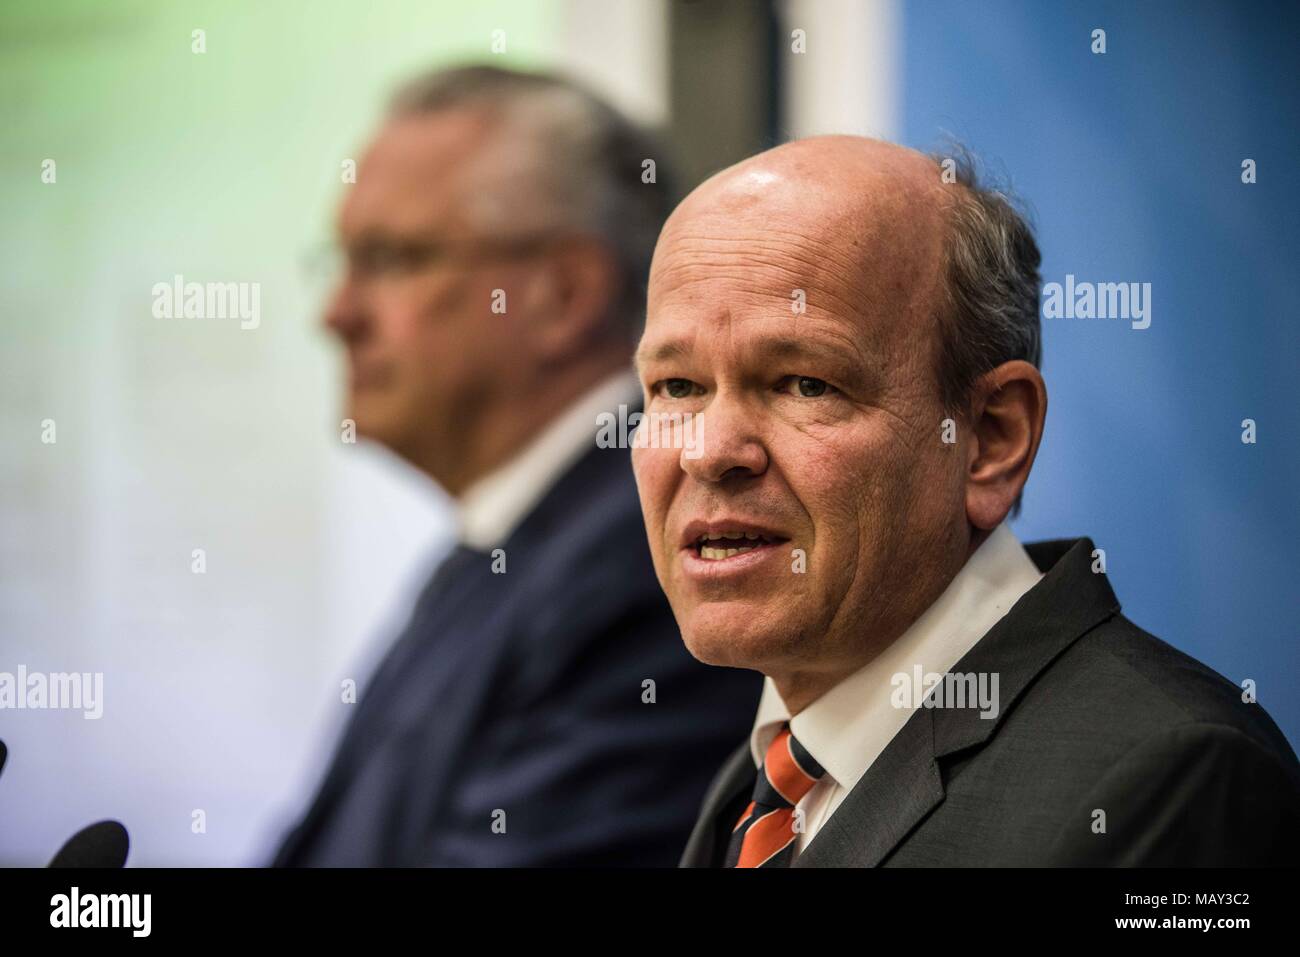 Munich, Bavaria, Germany. 5th Apr, 2018. Dr. Burkhard KÃ¶rner of the Bavarian Verfassungsschutz.The 2017-2018 edition of the Bavarian Verfassungsschutzbericht (Office for the Protection of the Constitution, Secret Service) report was released detailing threats to the state of Bavaria, including right- and left-extremism, Islamists, as well as Cyber Warfare and Espionage. The report introduced by Bavarian Innenminister Joachim Herrmann (CSU) and Dr. Burkhard KÃ¶rner, as well as .In recent years, Bavaria has seen a sharp rise in what is known as PMK-Rechts (politically motivated crimes- right Stock Photo